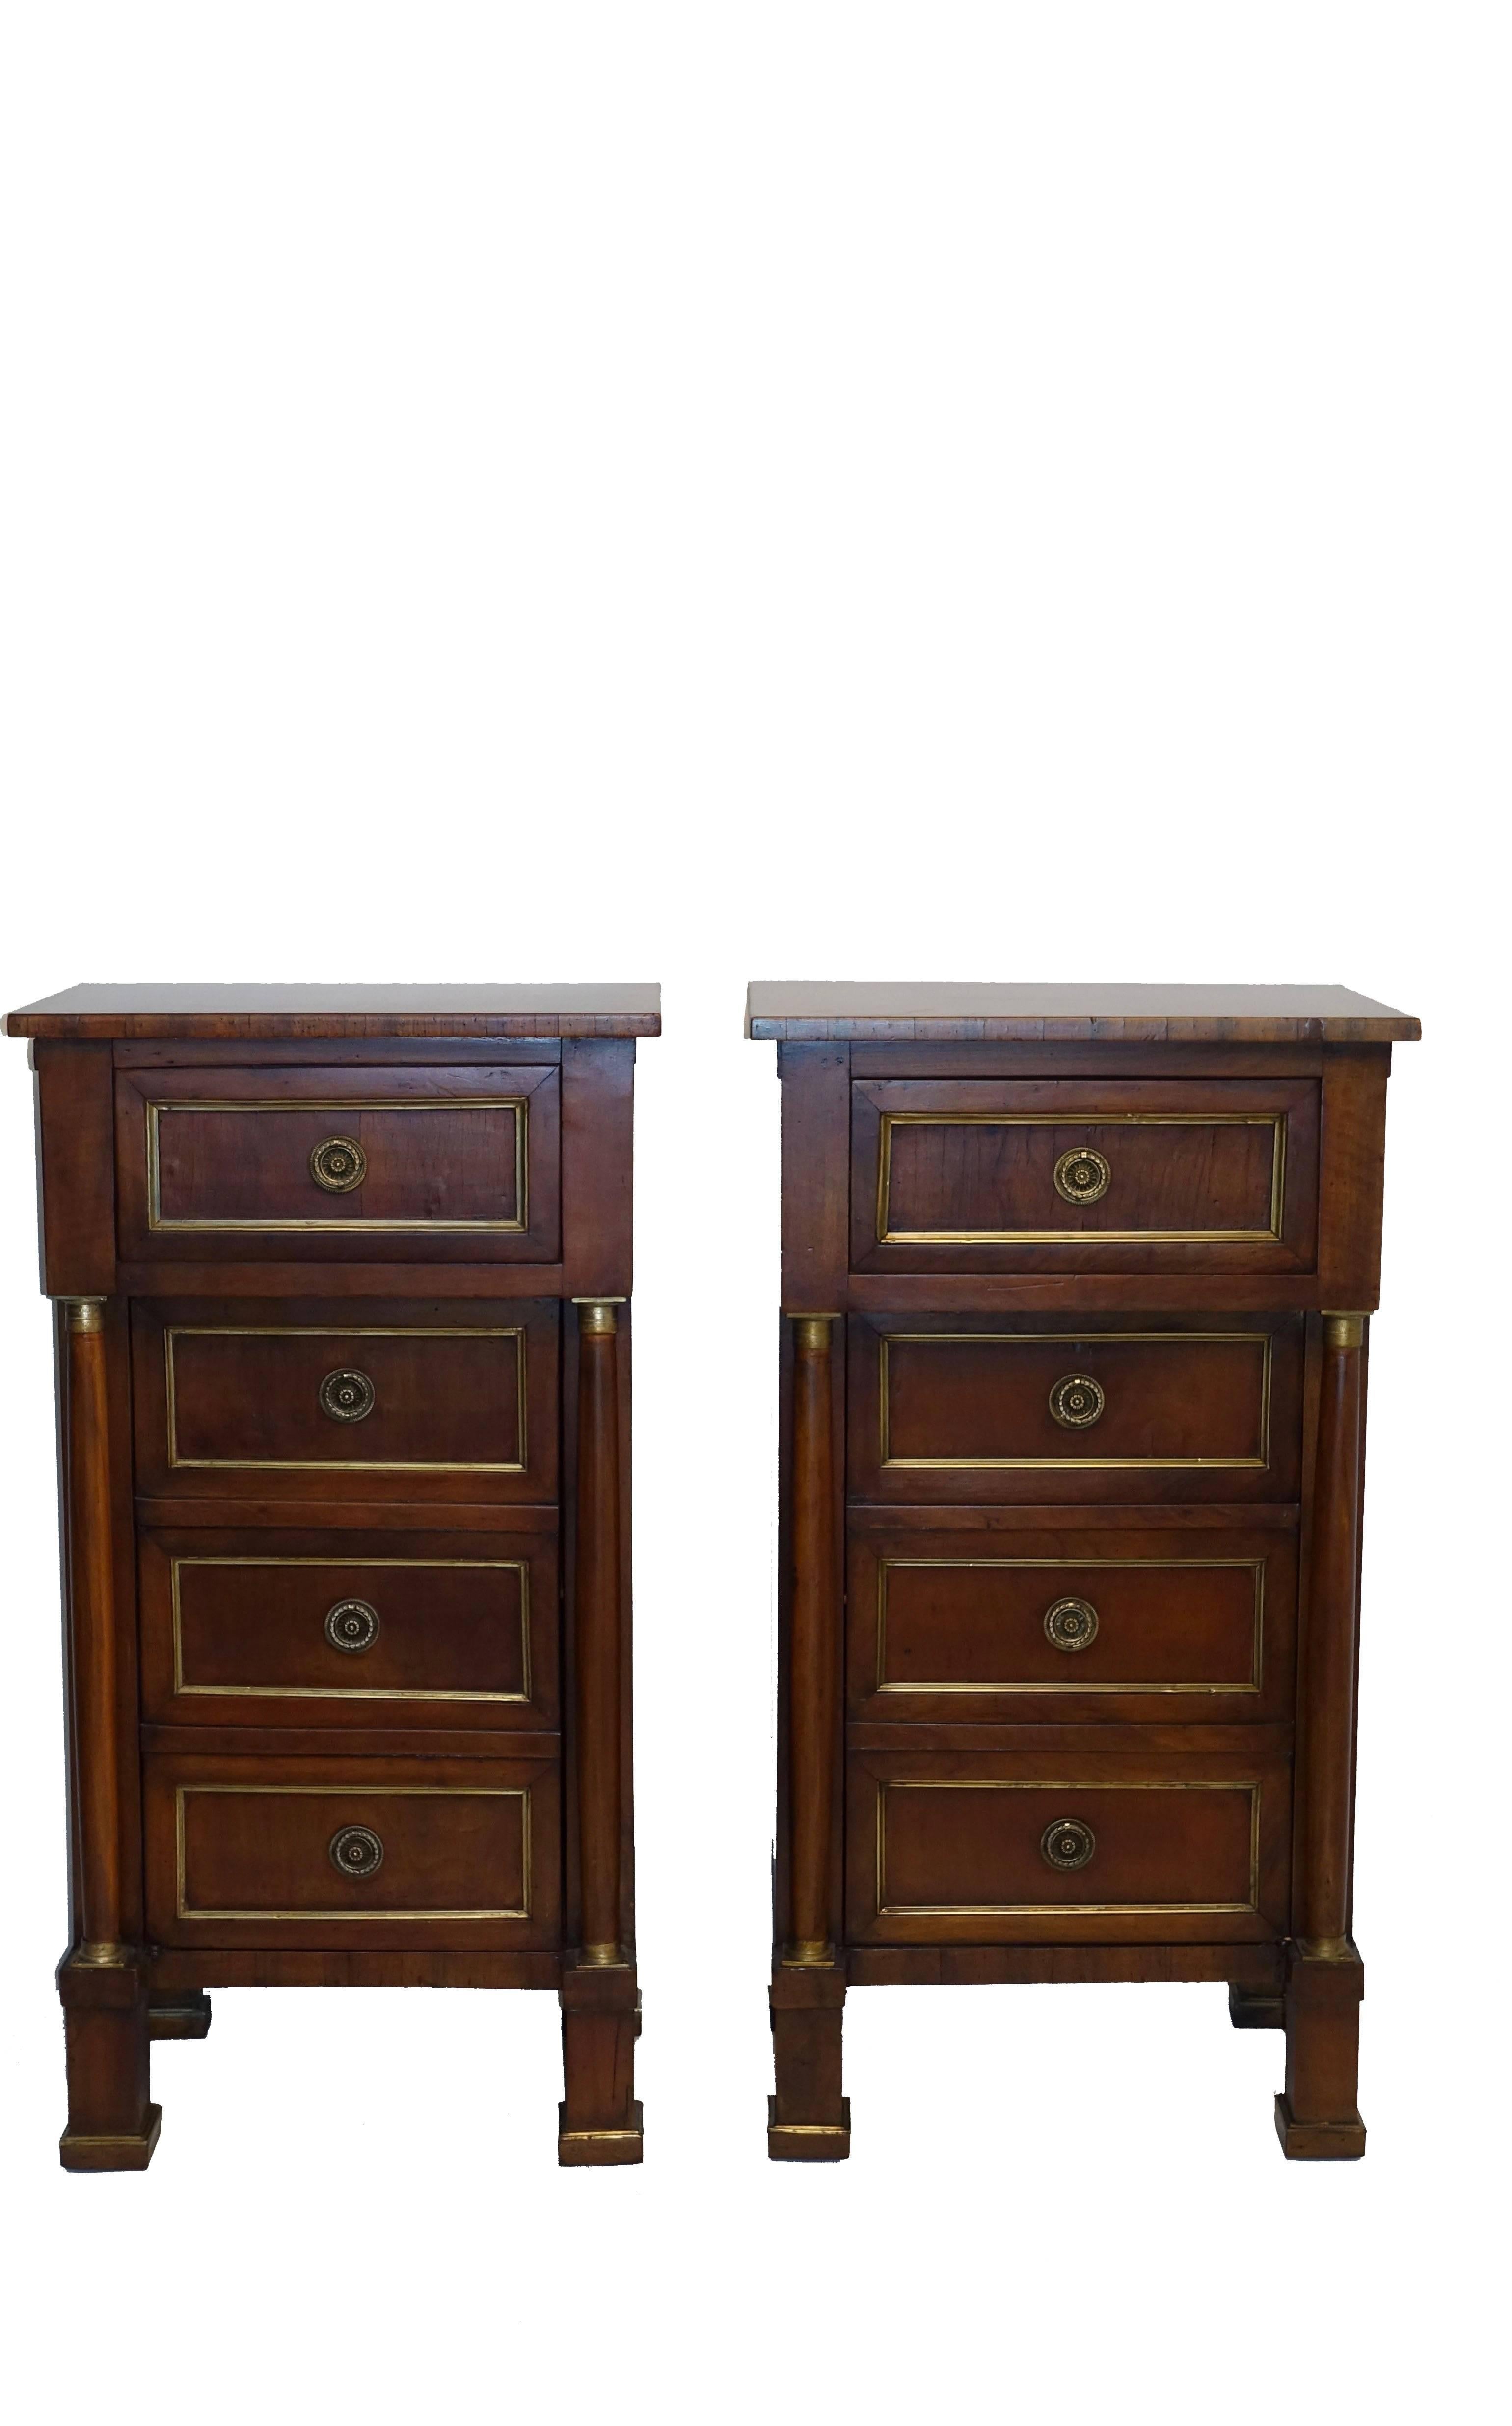 A pair of Empire period walnut comodini, side tables or bedside cabinets. Having a single drawer above three false drawers that open to a cabinet, the door flanked by a pair of columns and brass moulding around the recessed panels, Italy, 19th